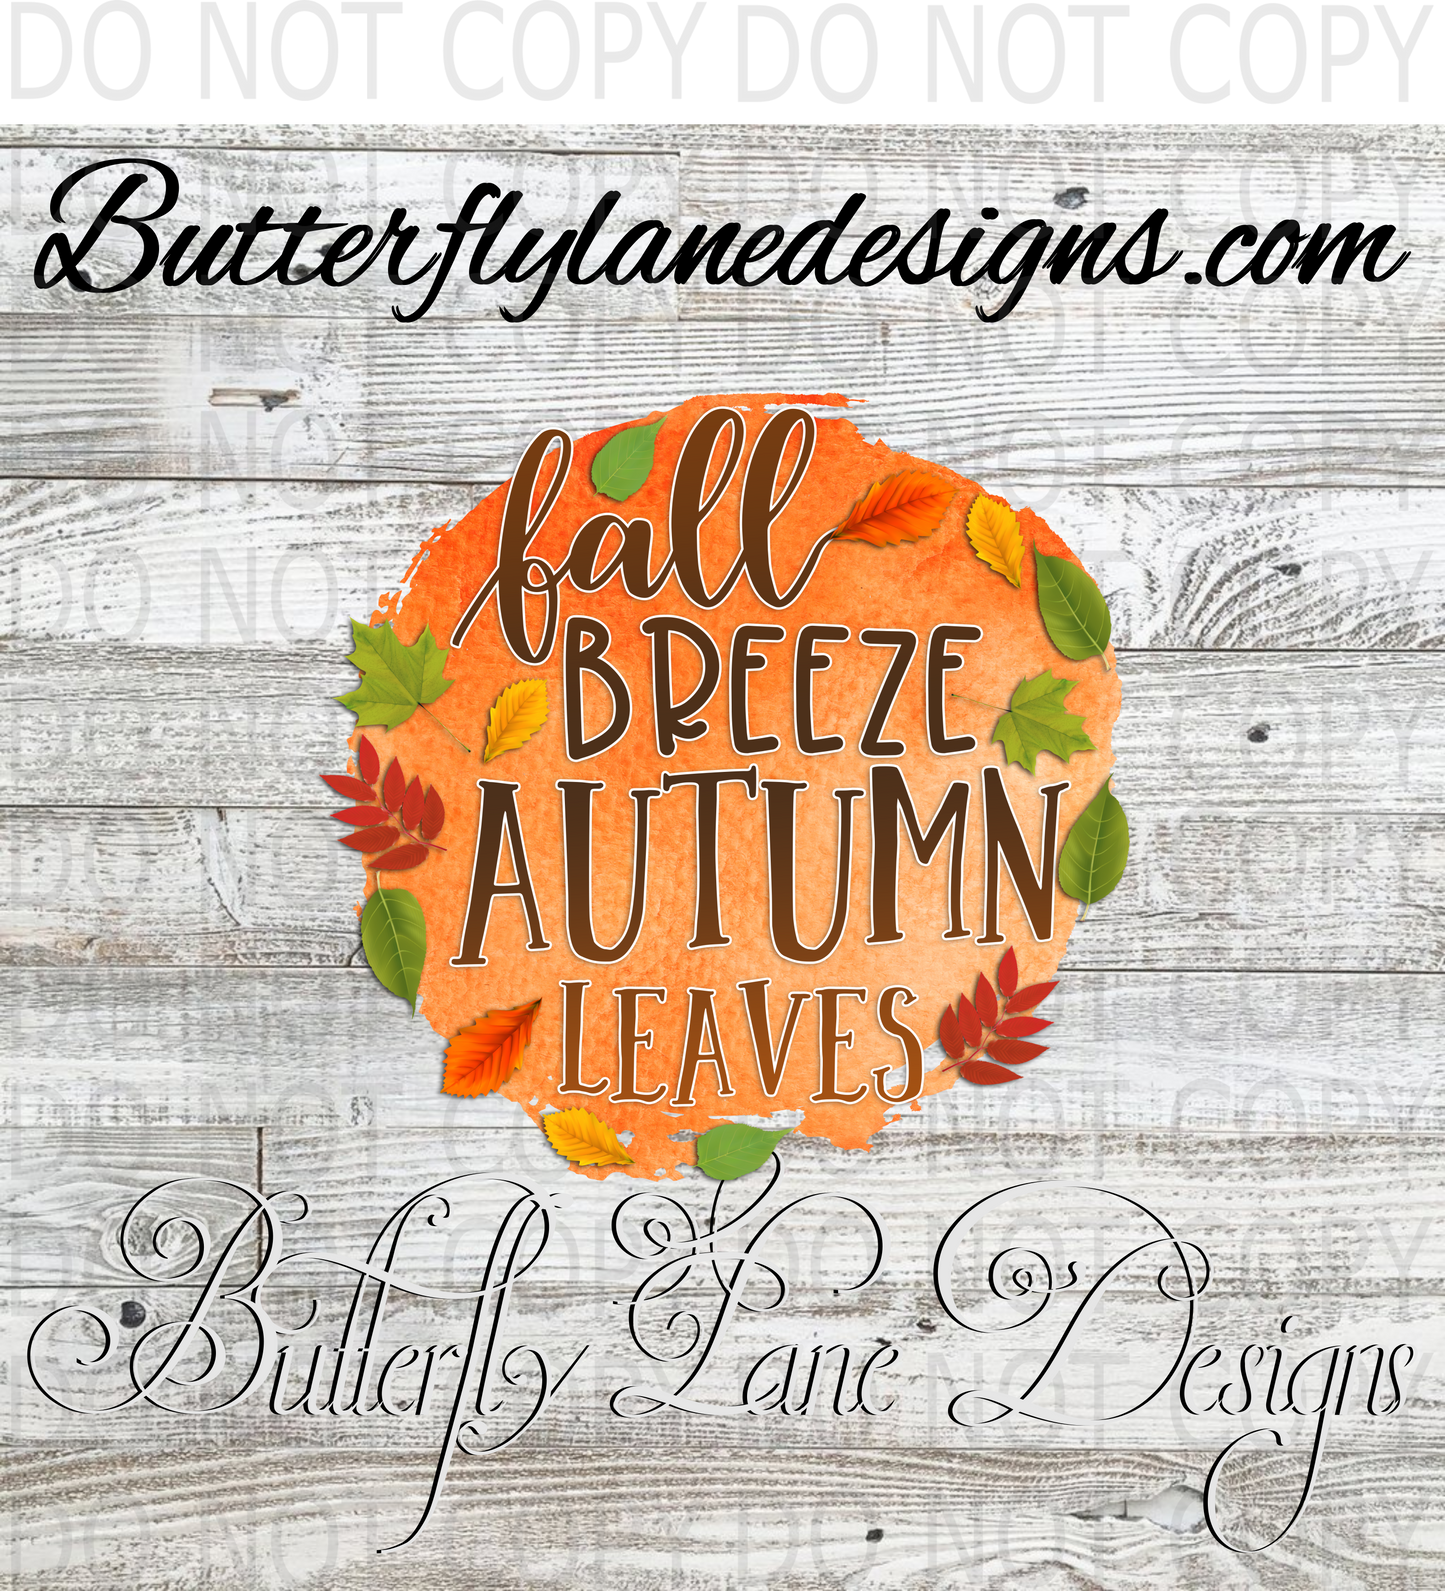 Fall breeze autumn leaves :: Clear Decal :: VC Decal